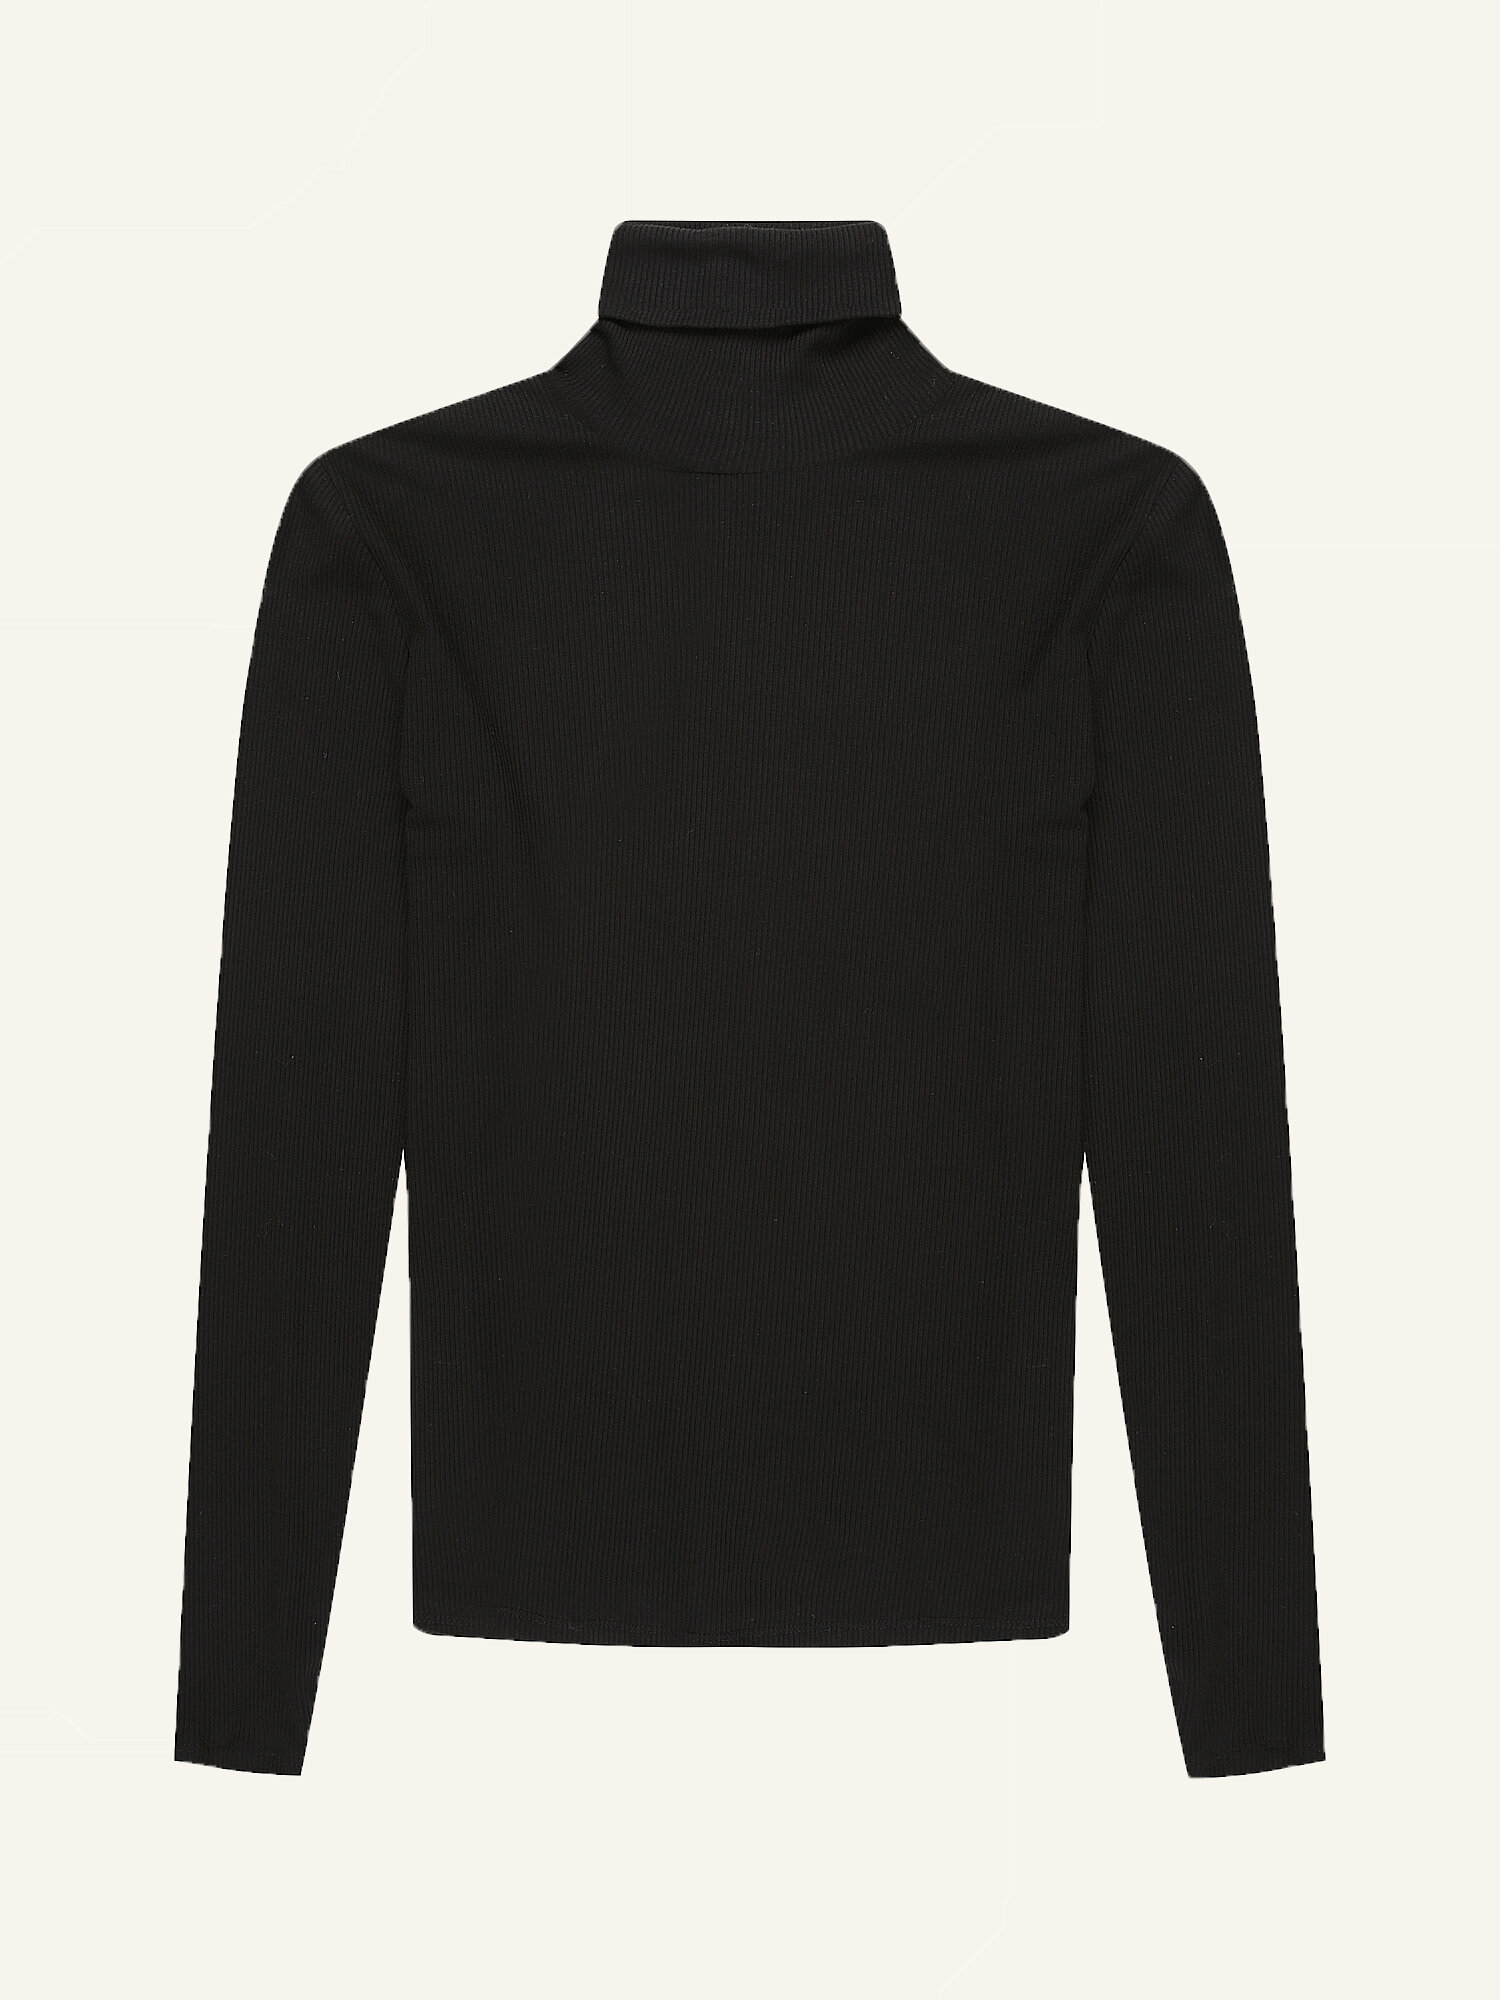 Cycad Turtle Neck Top 